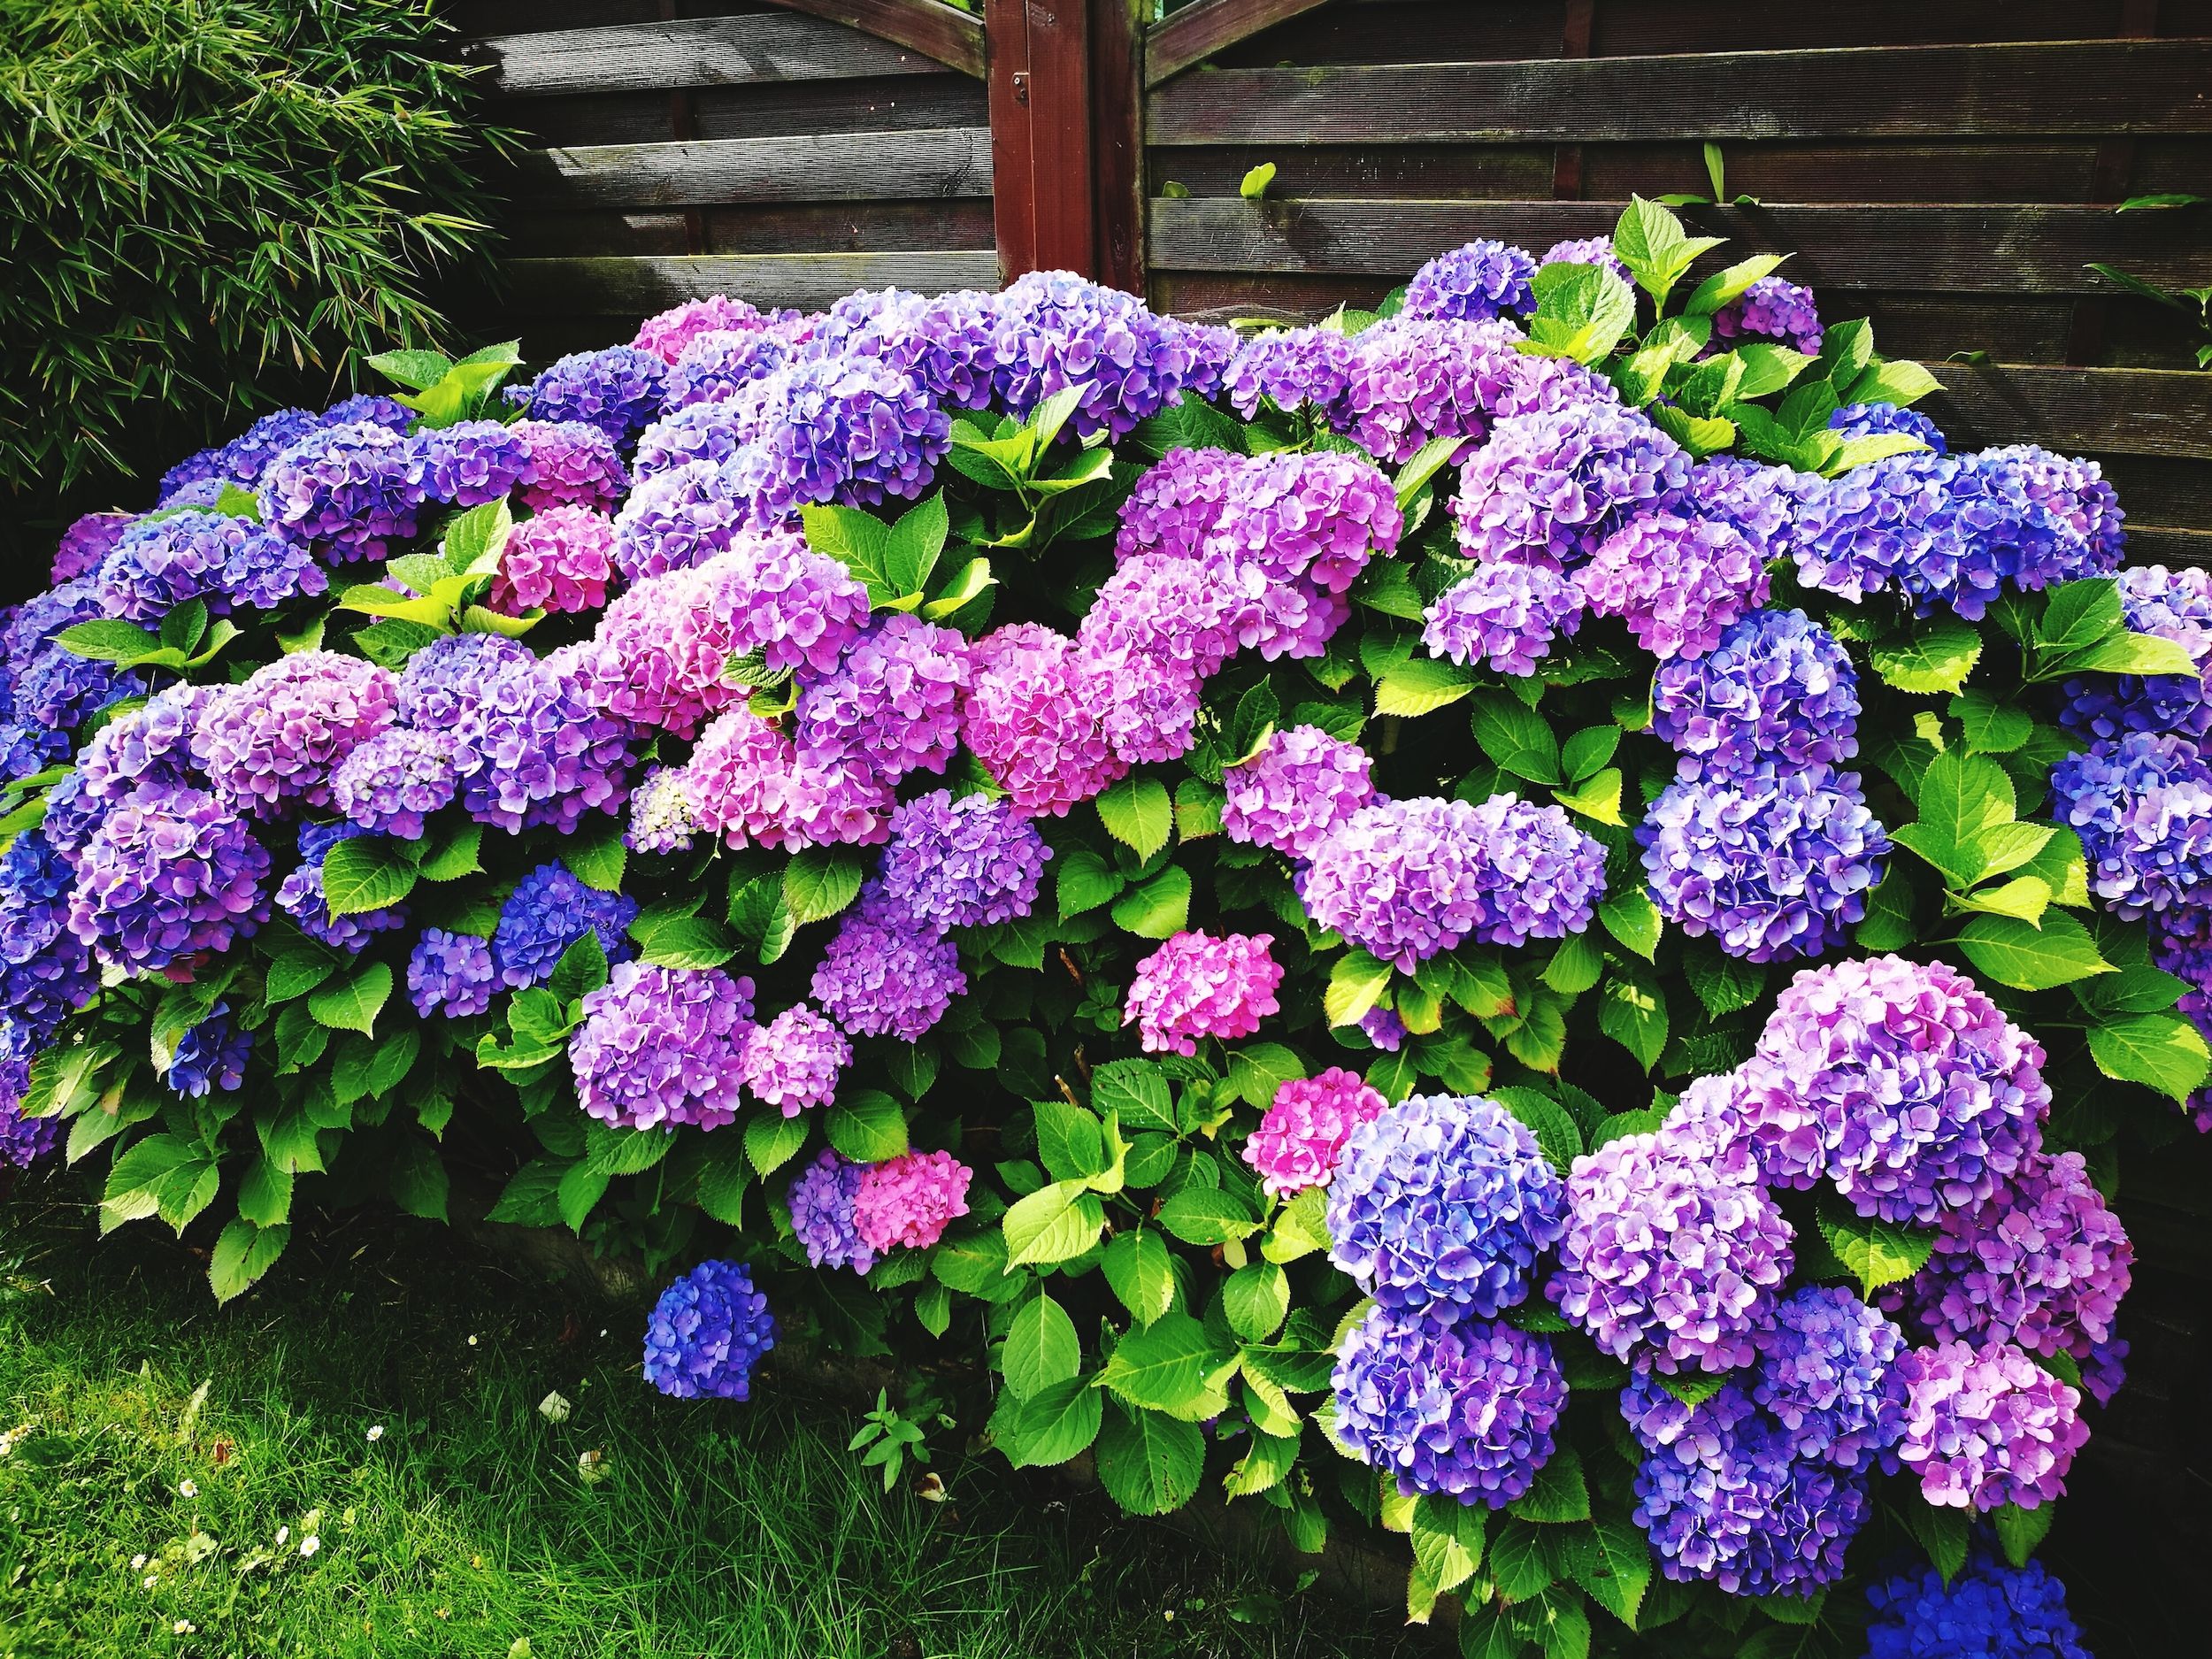 Image of Hydrangeas in different colors